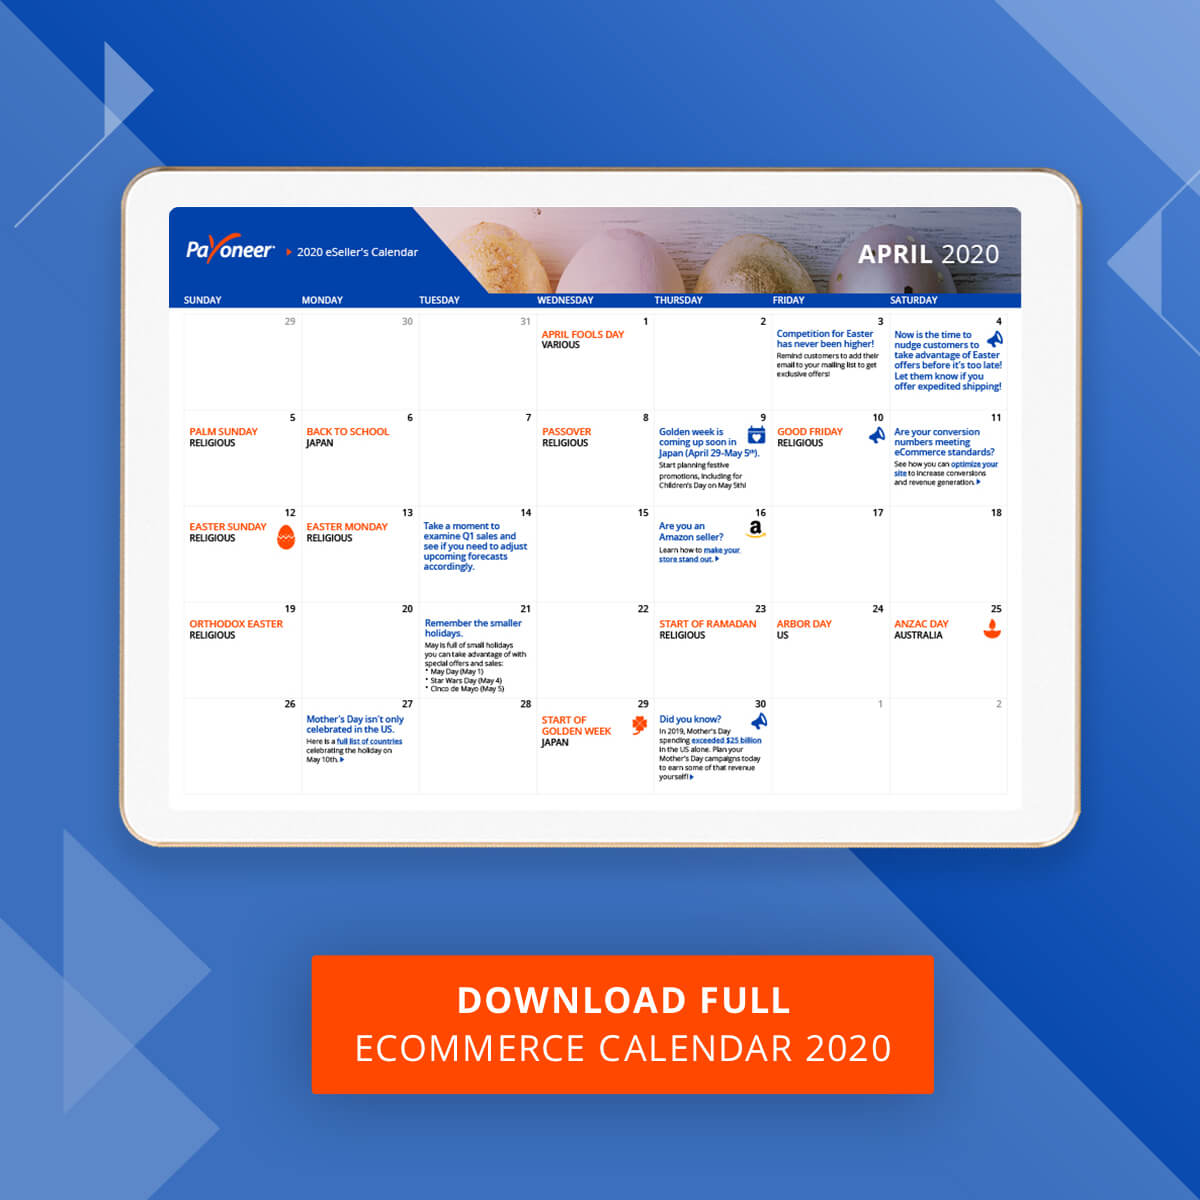 Full eCommerce Holiday Calendar Download